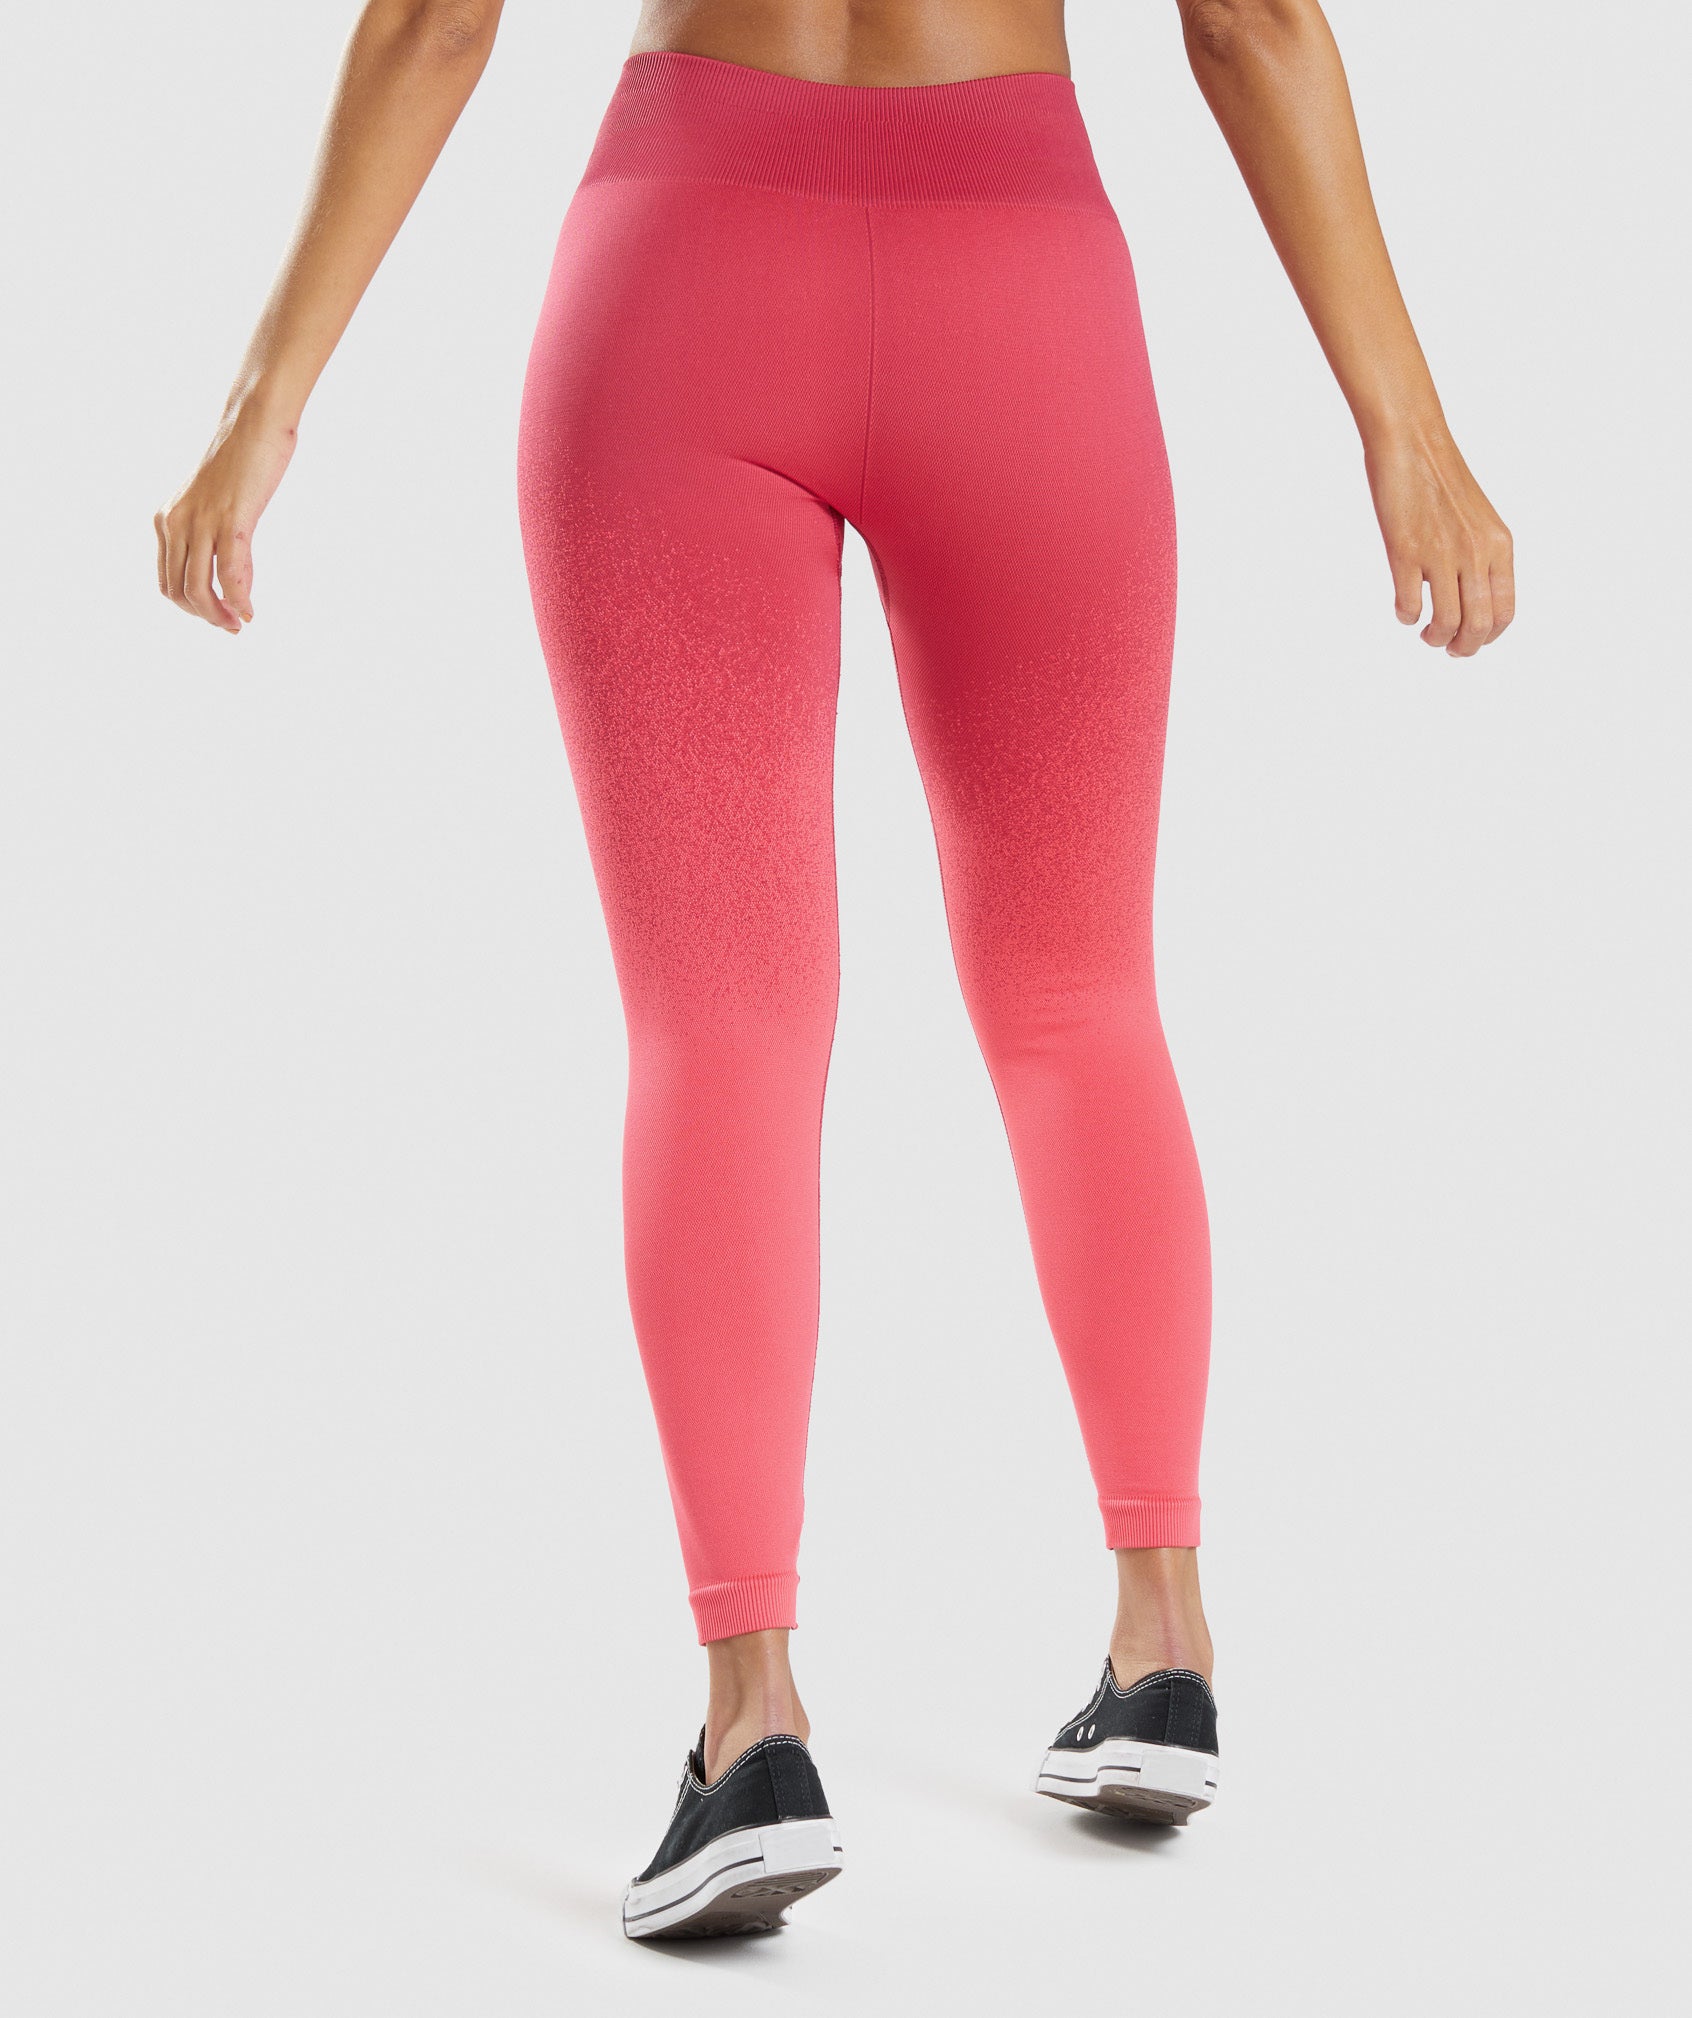 Gymshark Geo Seamless Leggings Rose Pink Red Booty, Size M, Great Condition